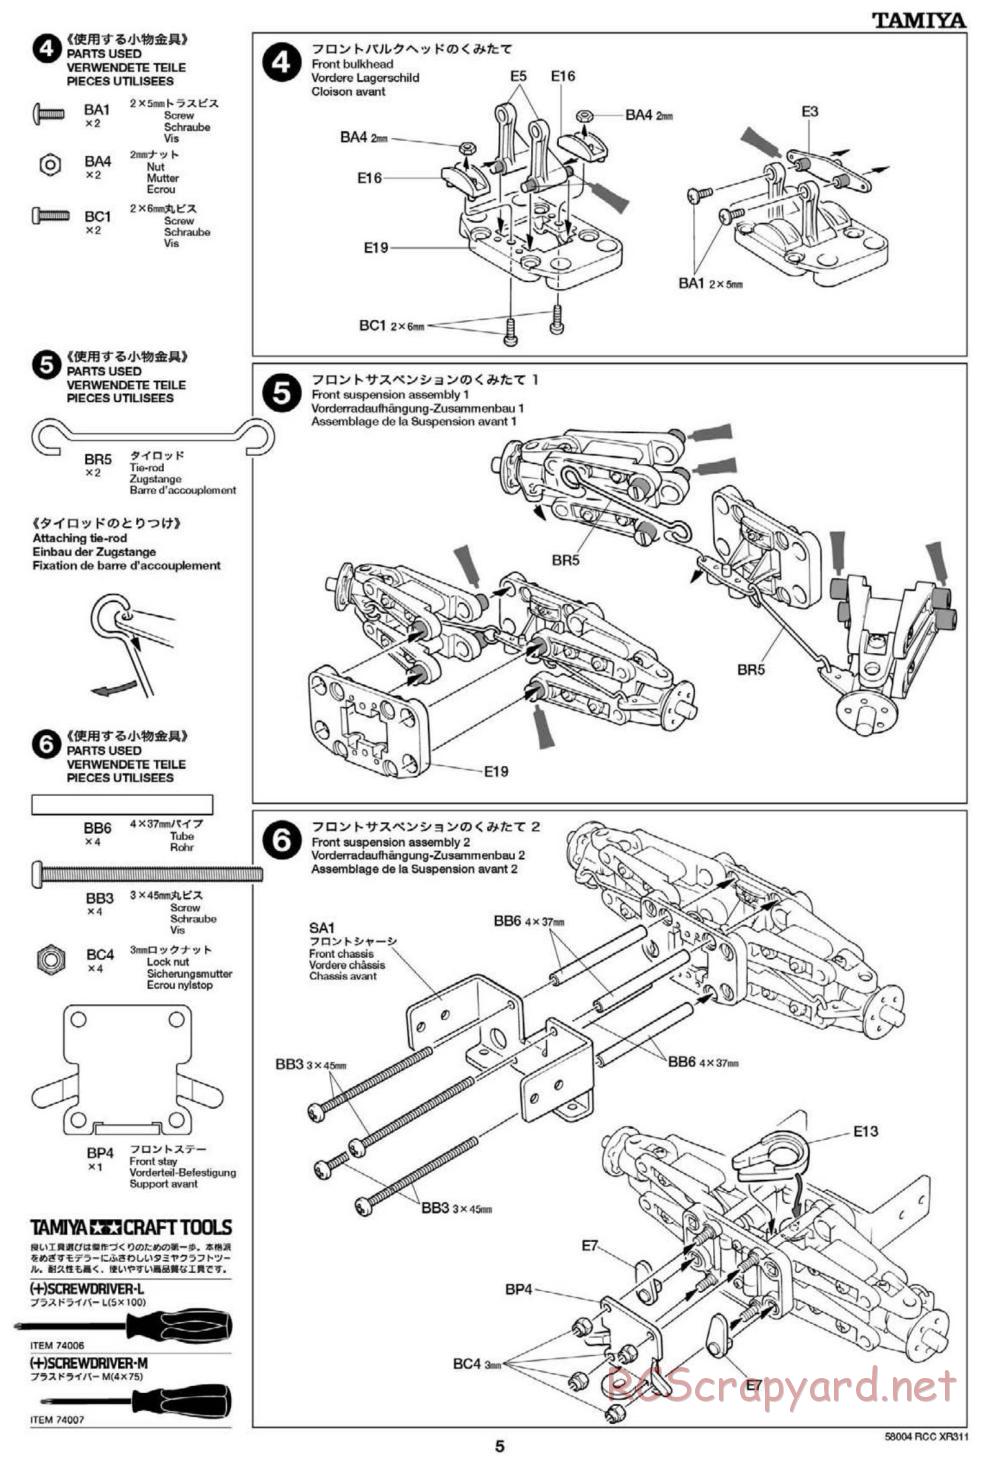 Tamiya - XR311 Combat Support Vehicle (2012) Chassis - Manual - Page 5